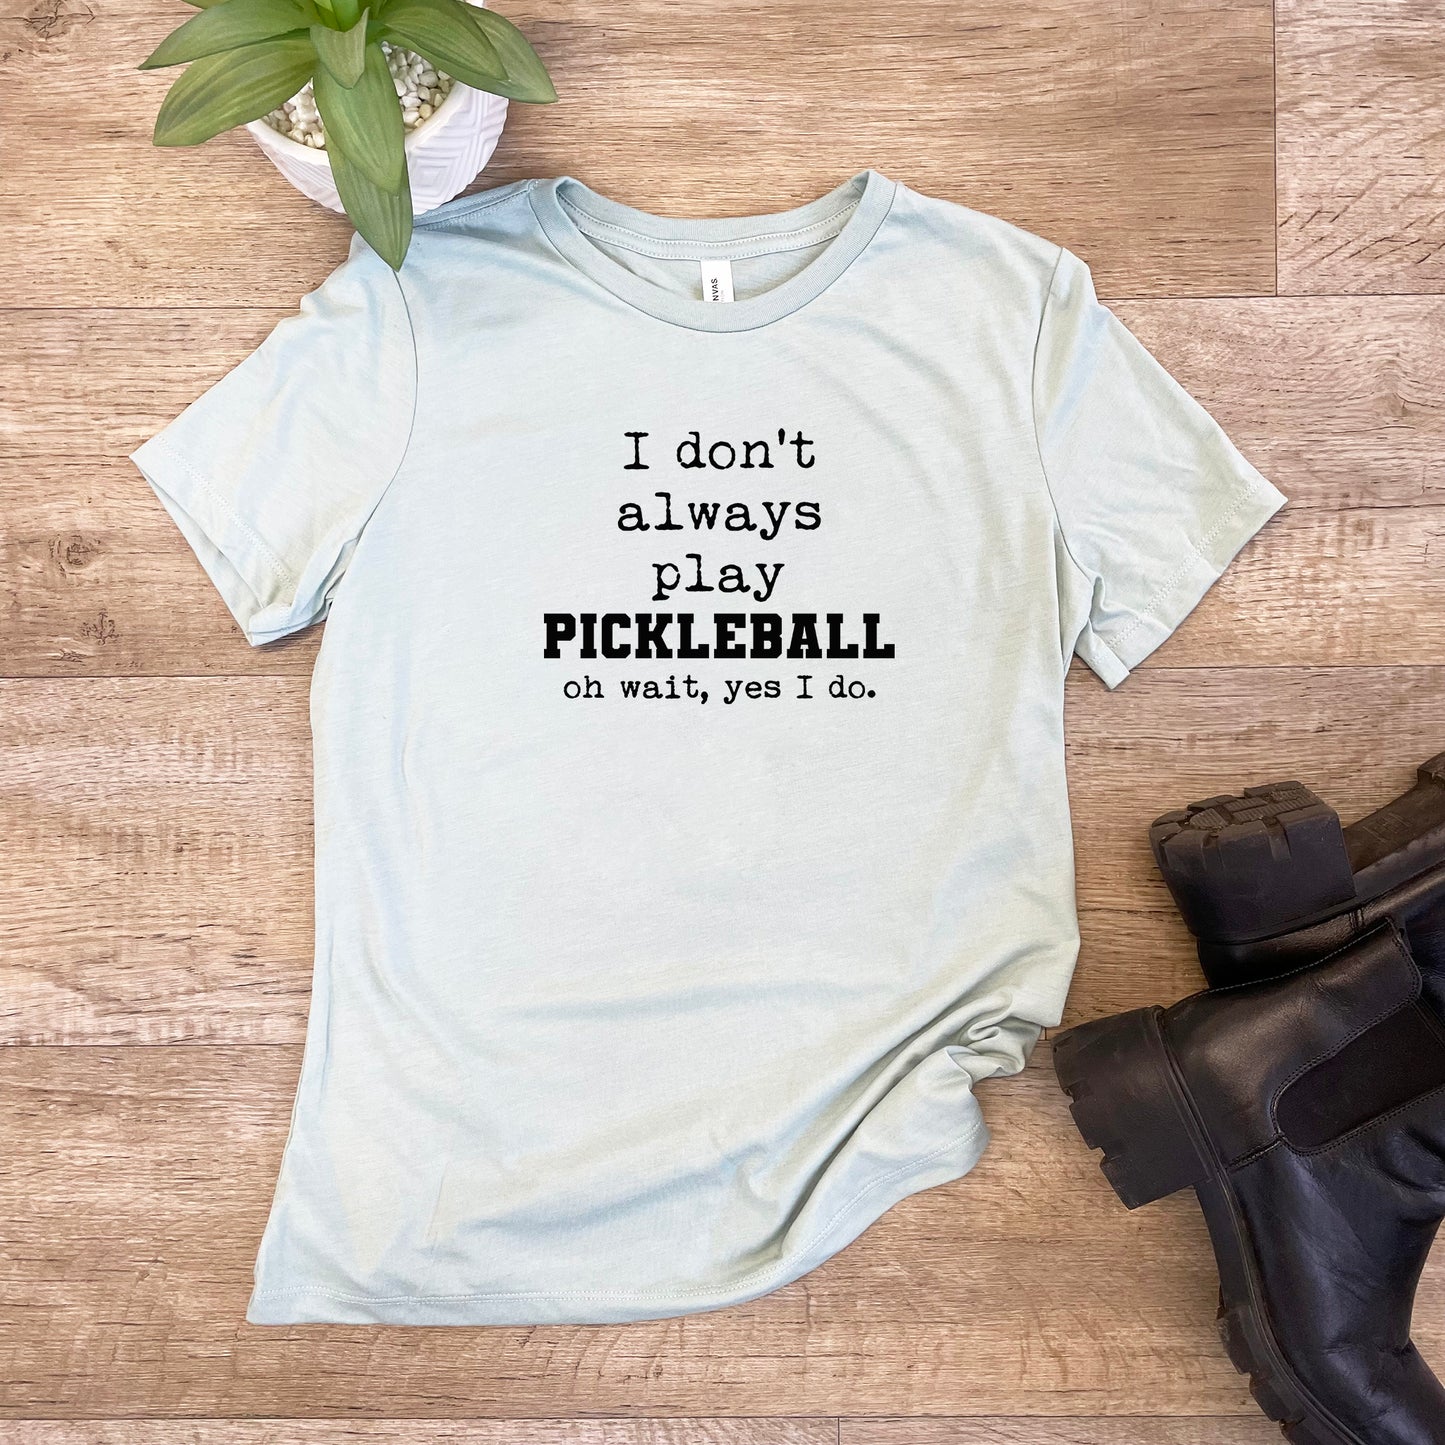 I Don't Always Play Pickleball (Oh Wait, Yes I Do) - Women's Crew Tee - Olive or Dusty Blue